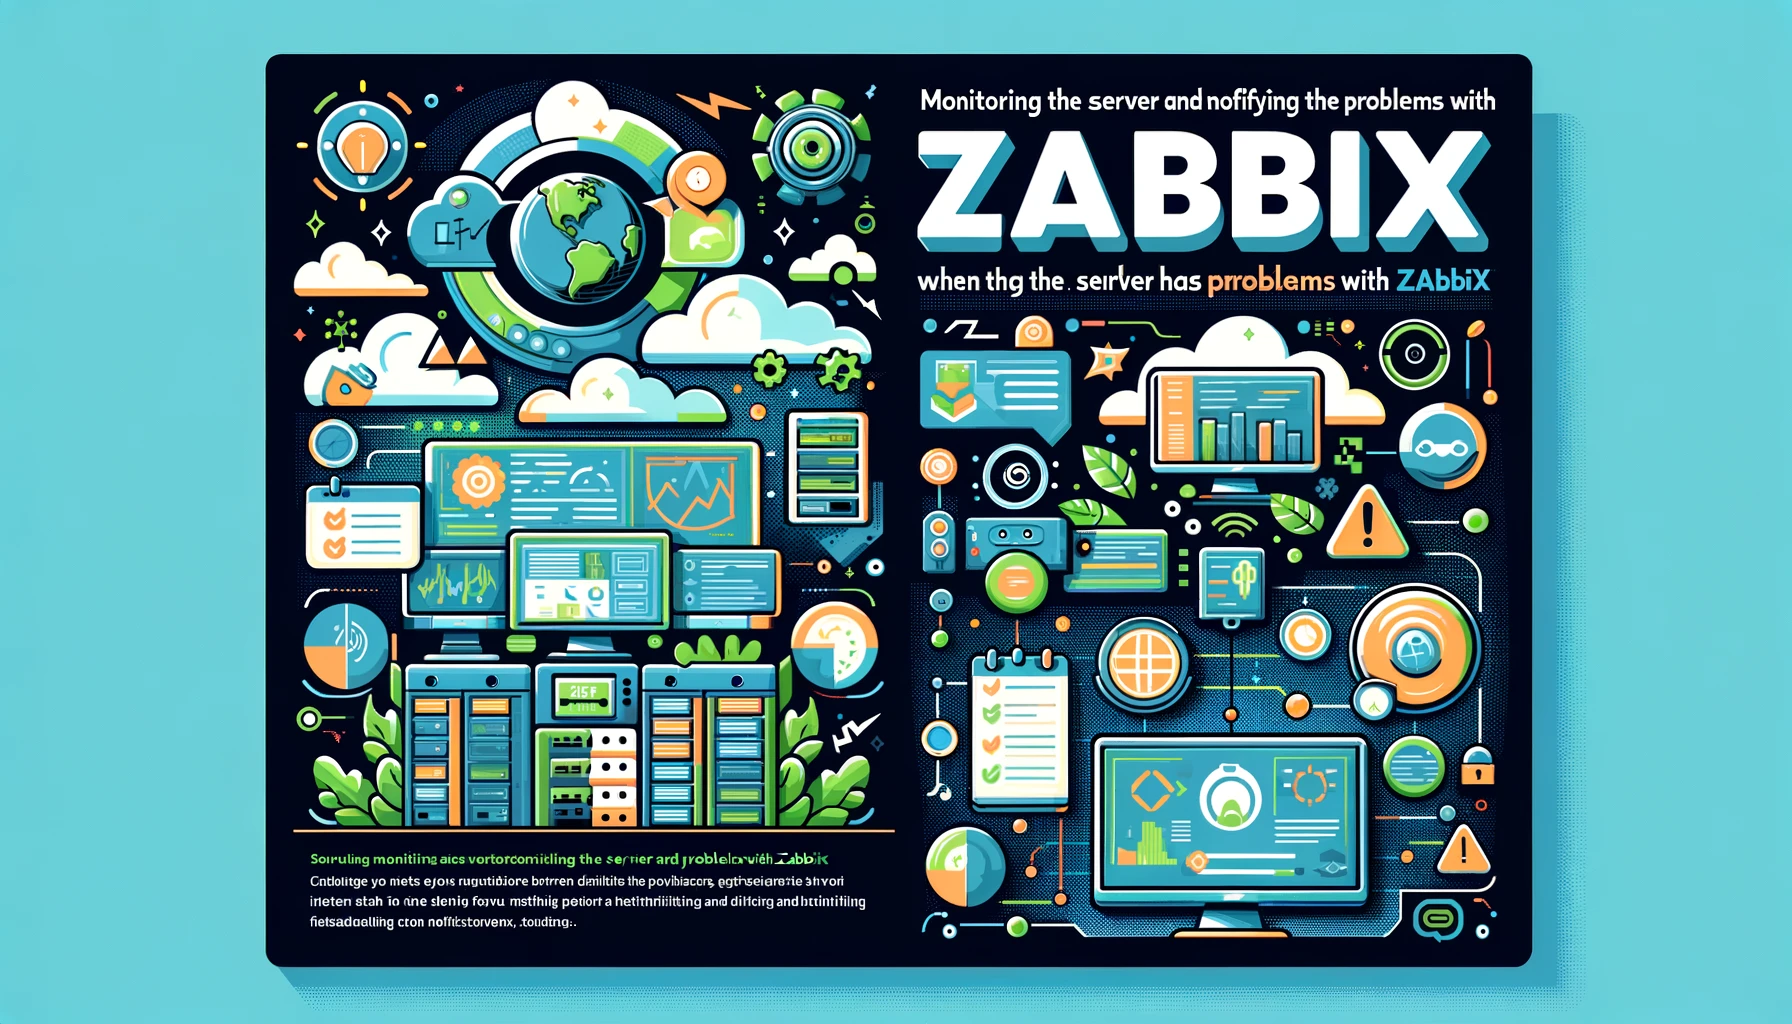 Lesstion 1 - Monitoring the server and notifying when the server has problems has never been difficult with Zabbix